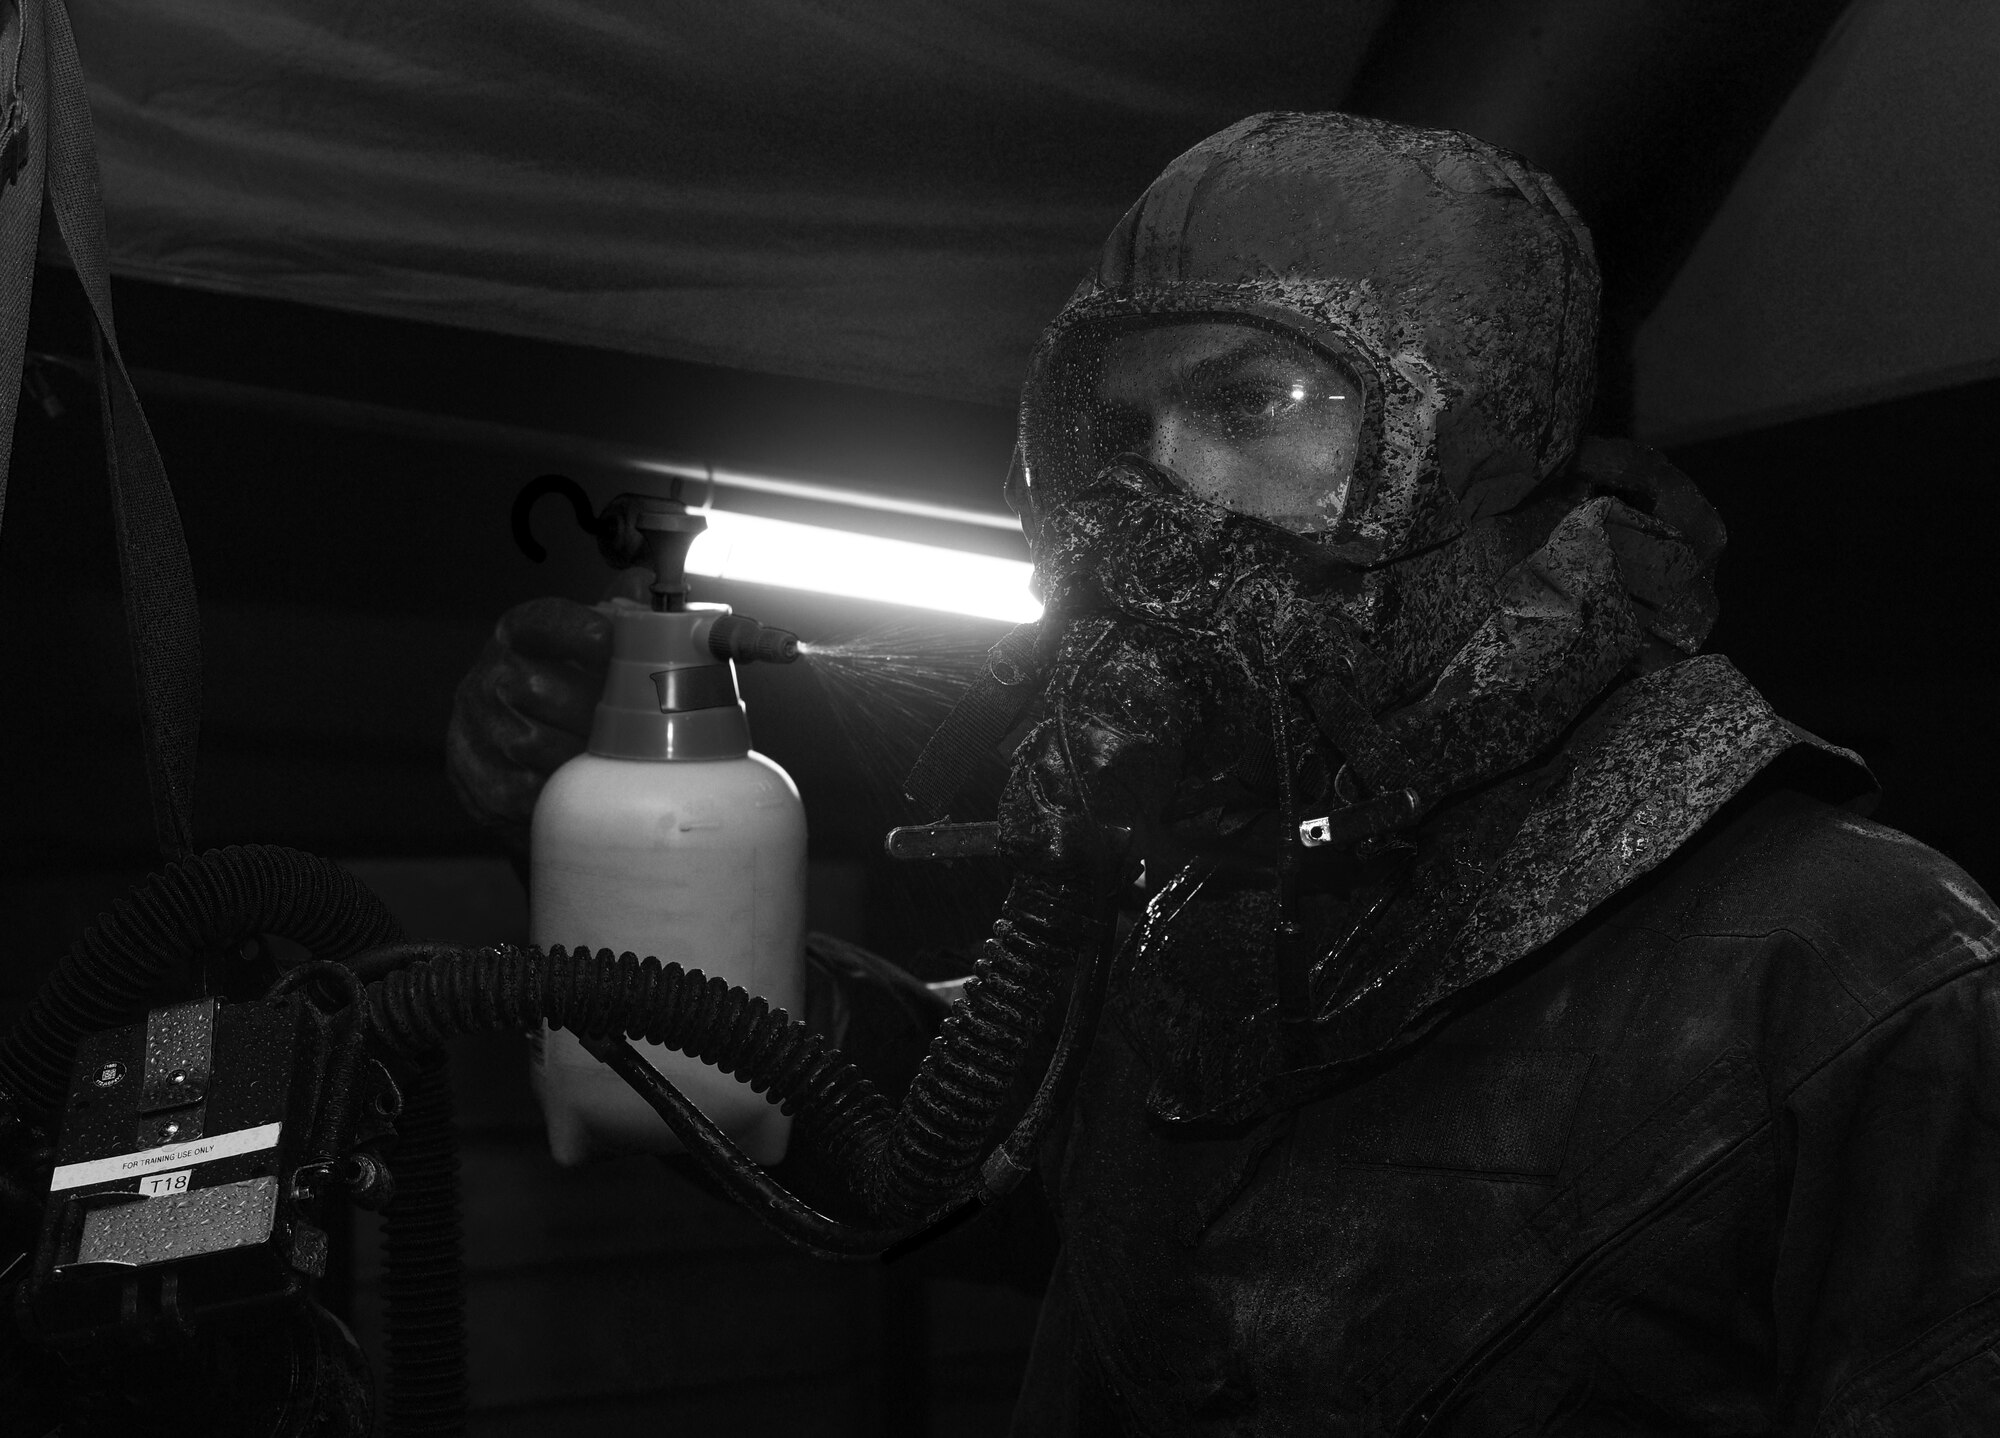 An aircrew flight equipment specialist sprays a simulated bleach solution on an aircrew member during the "final exam" phase of an Air Staff exerise rehearsing deployed decontamination processes. Air Force Special Operations Command’s operations directorate ran a realistic, scenario-based, training program for 16 Airmen from eight southern United States bases. (U.S. Air Force photo / Staff Sgt. Melanie Holochwost)